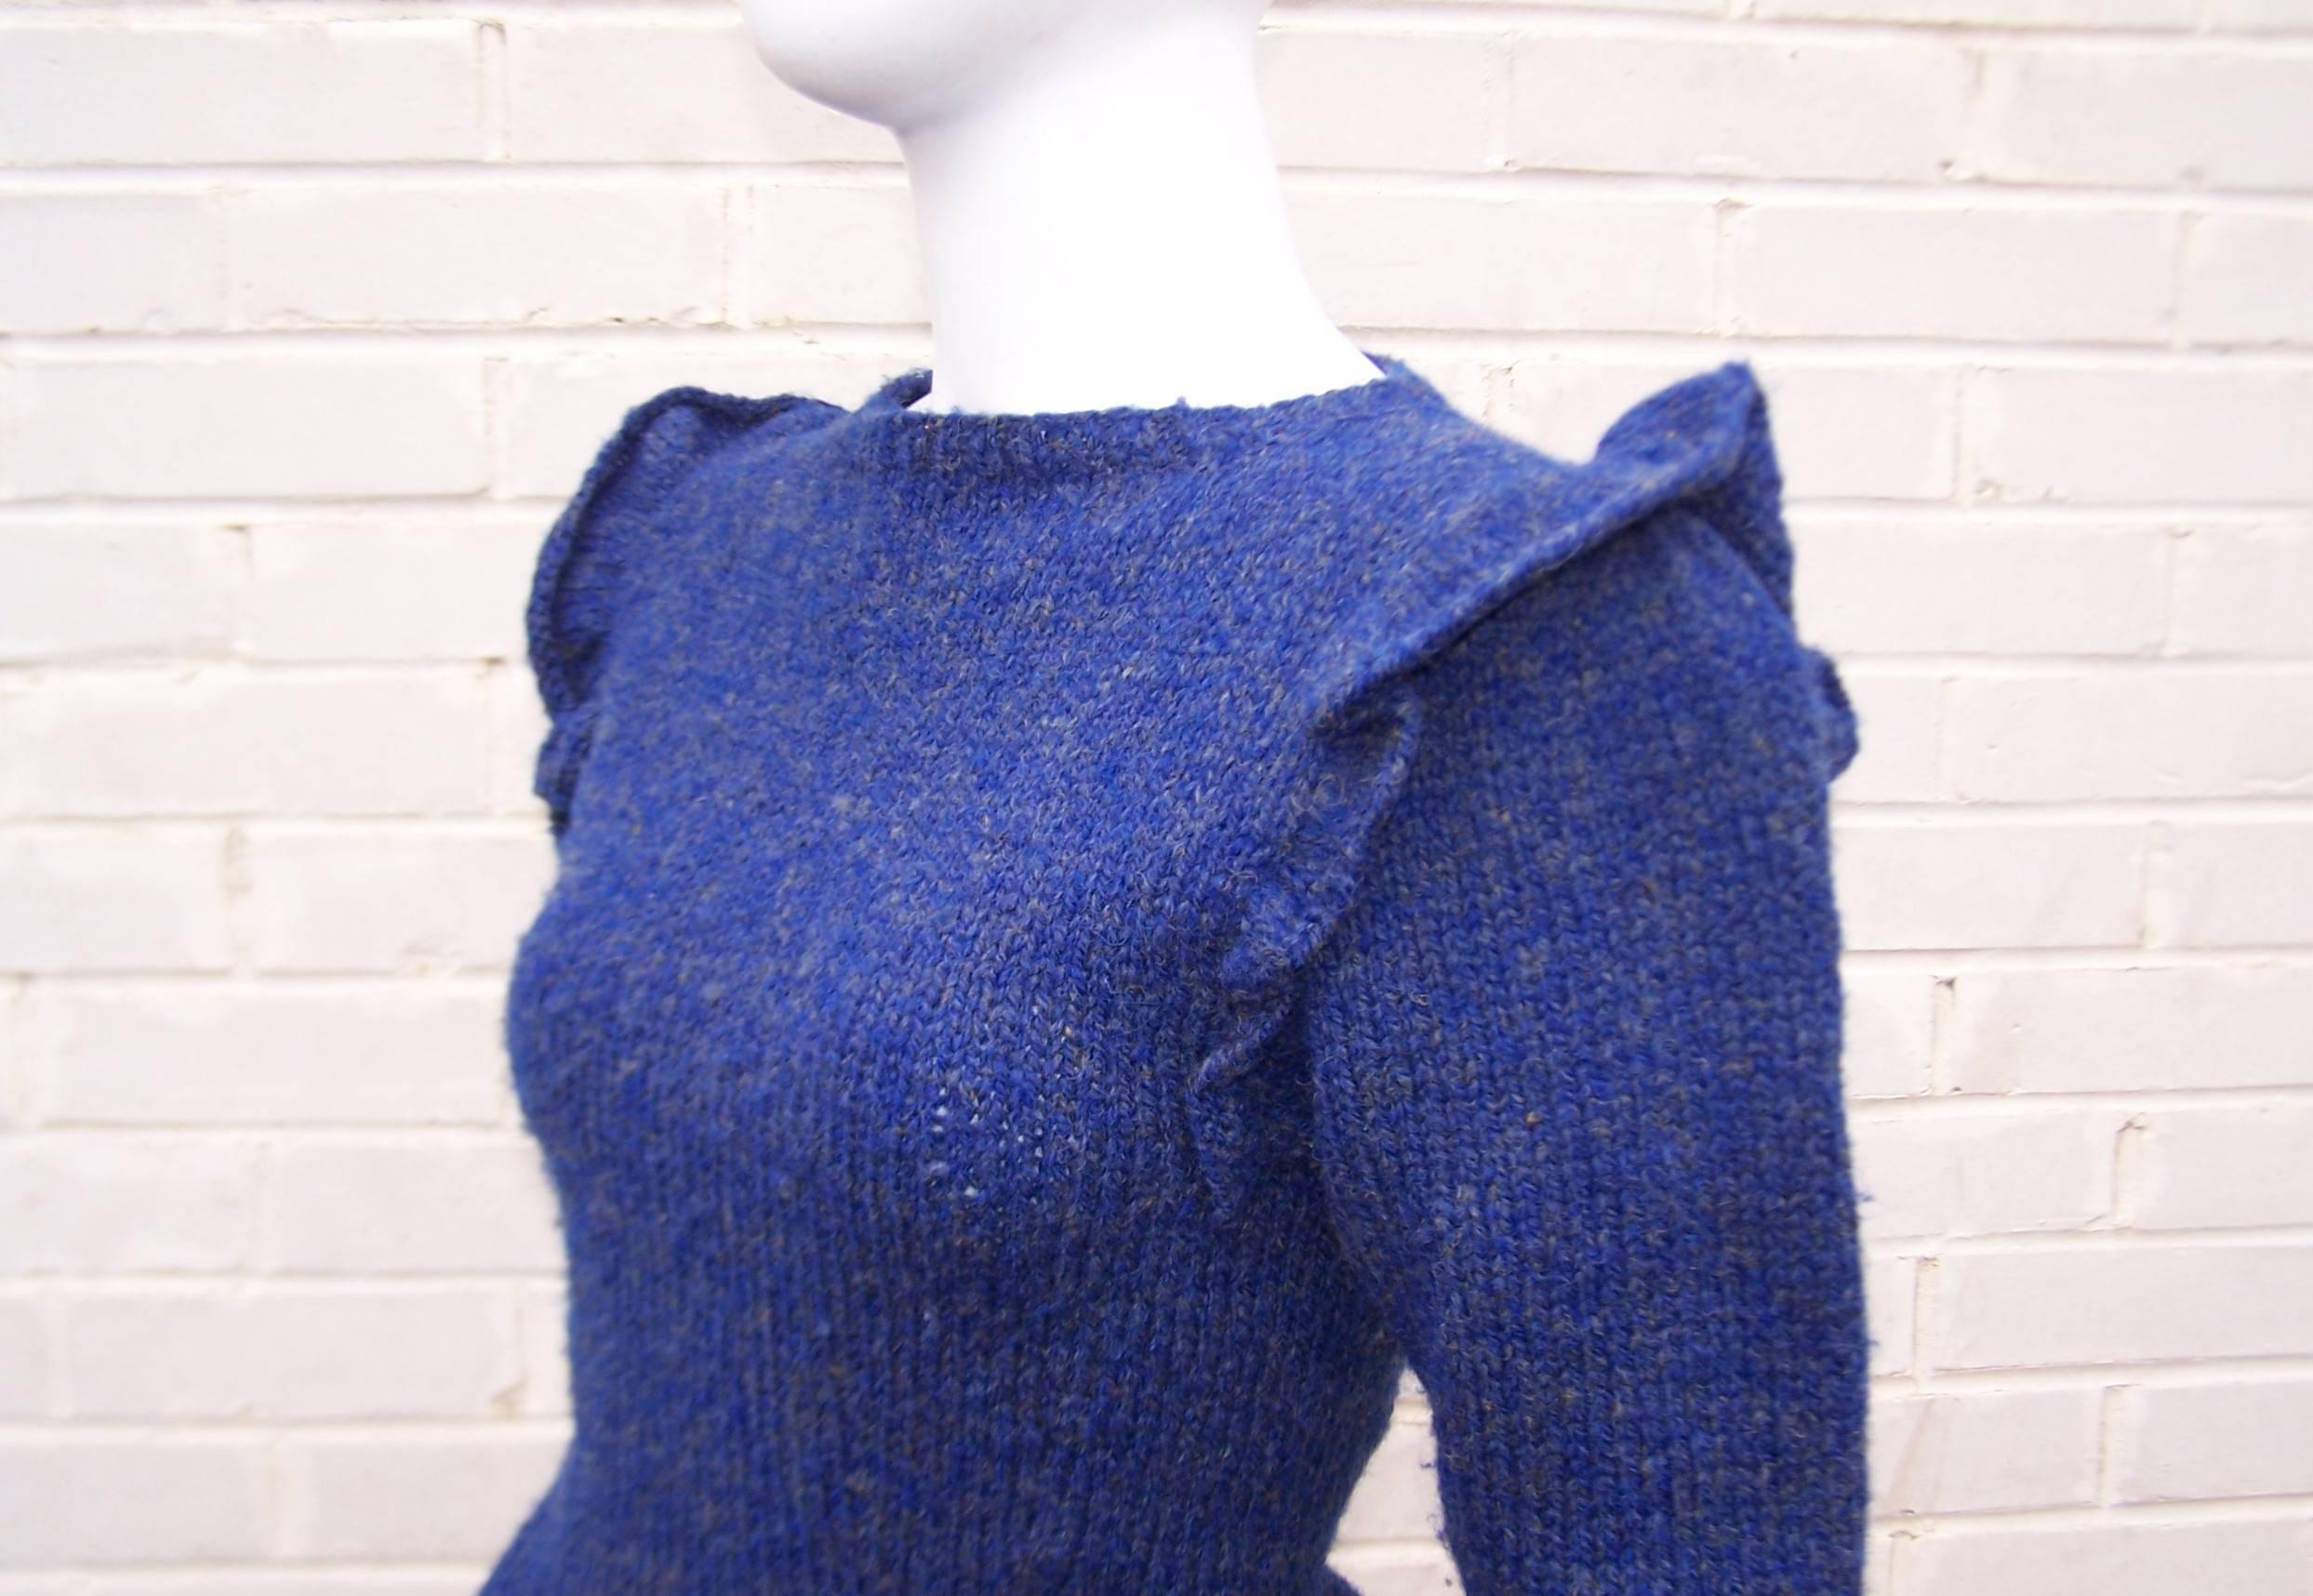 Love the details on this C.1980 sweater from Perry Ellis.  The lapis blue wool is accented with gray flecks to create a vibrant color combination perfect for adding color to your woolens.  The pullover style features a modified ballerina neckline